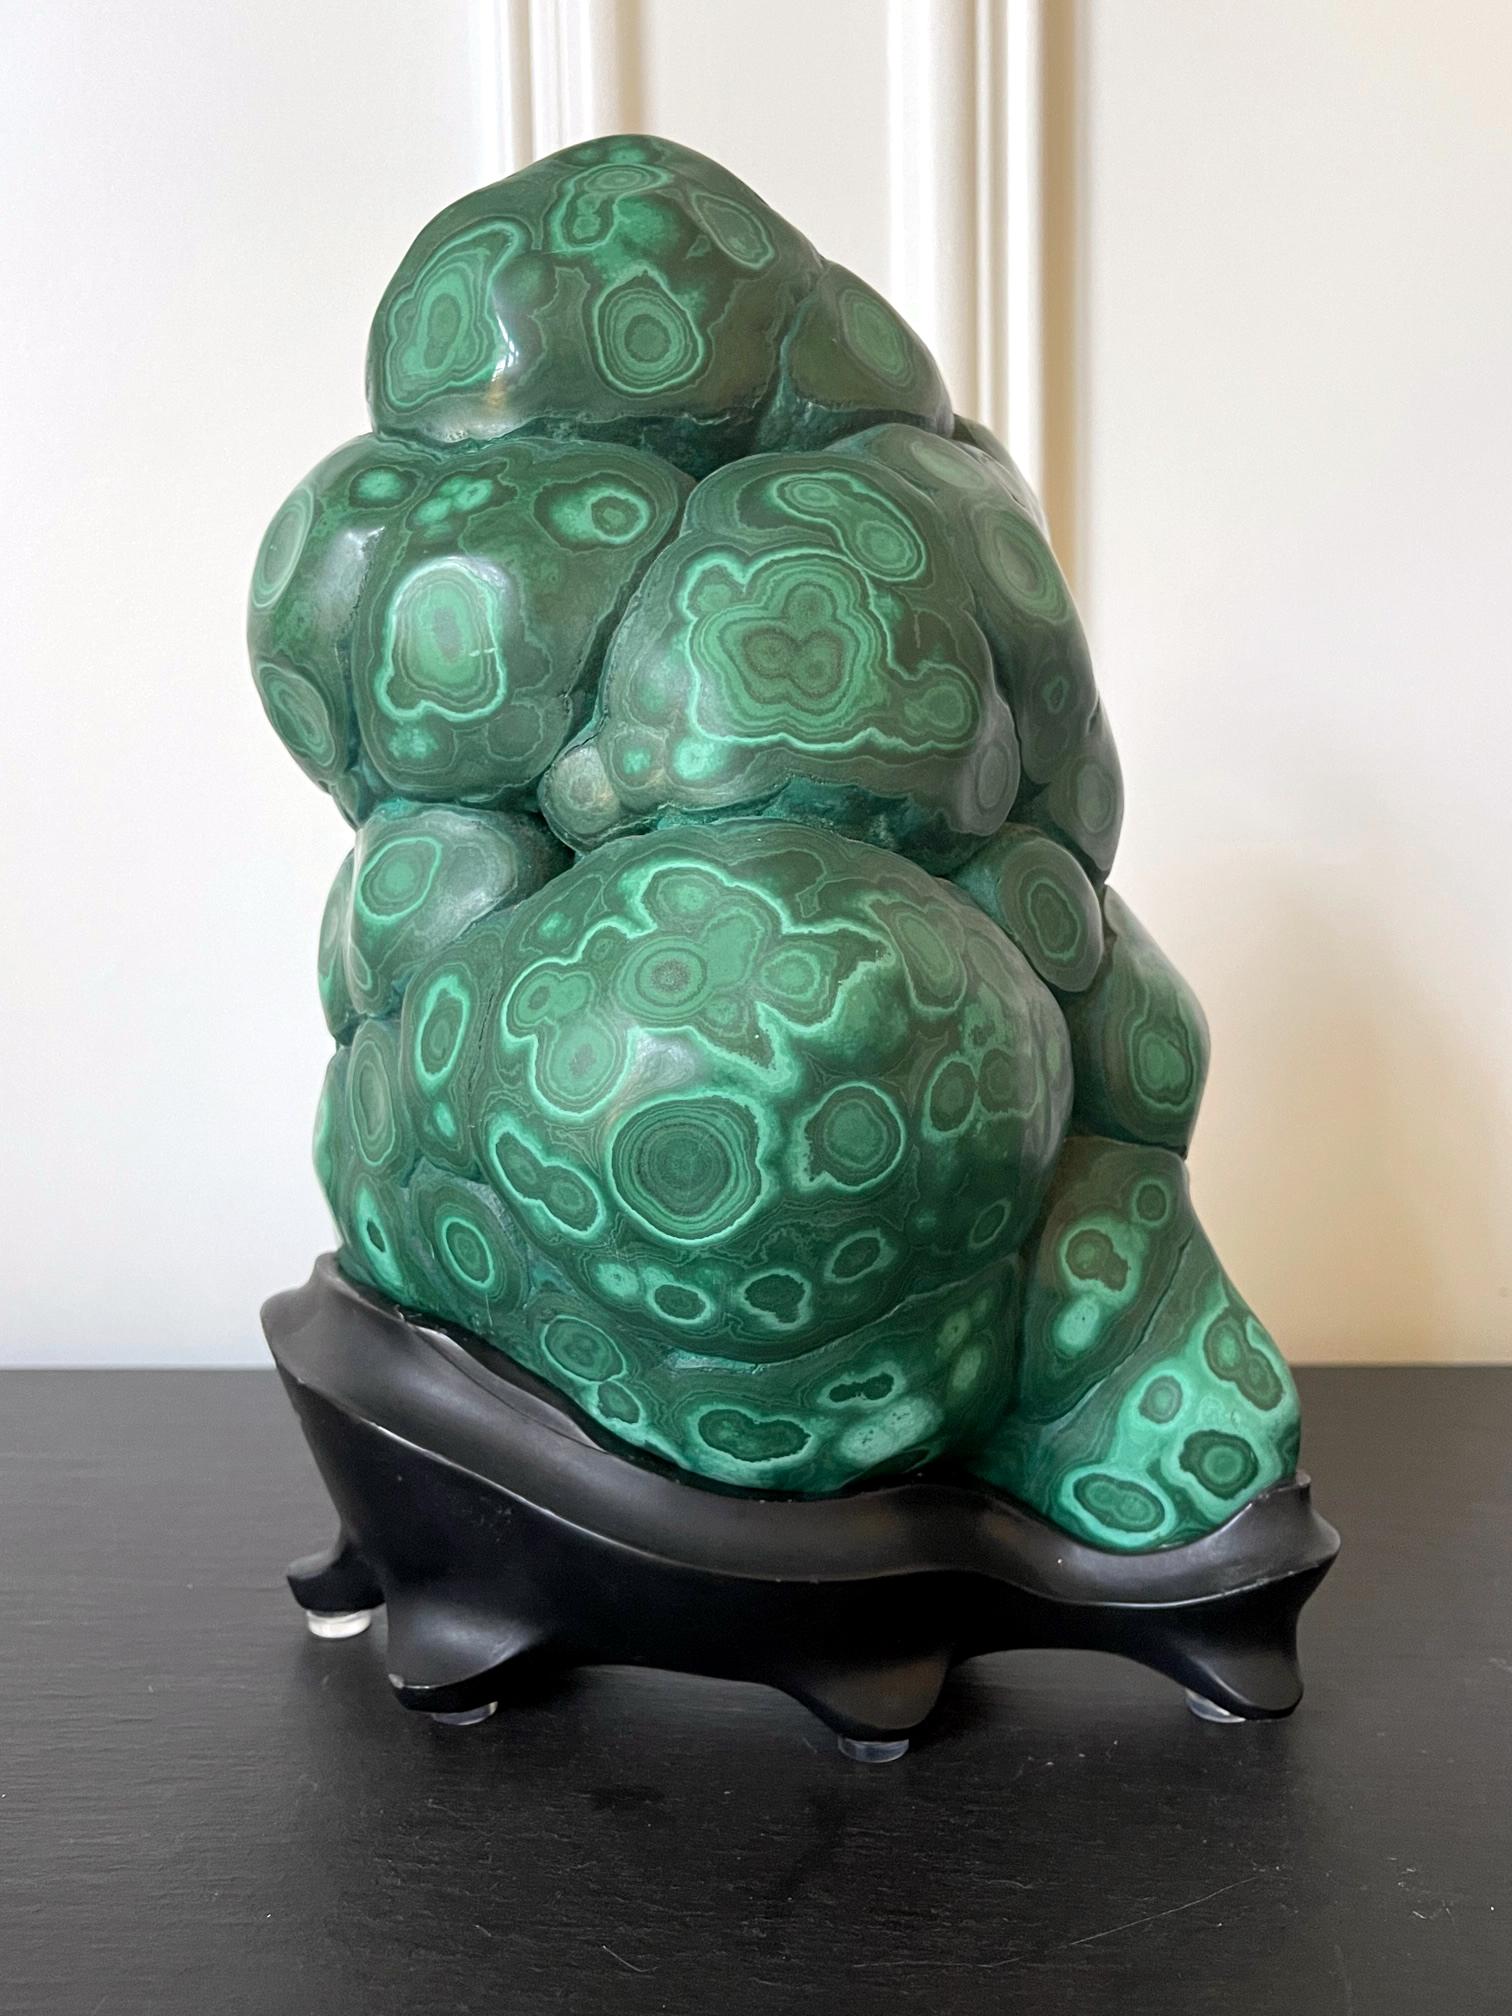 A malachite rock specimen with intense green and black colors fitted on a wood stand and displayed as a Chinese scholar stone. The gemstone in the botryoidal form was polished in all sides except the back with a natural fissure to reveal the